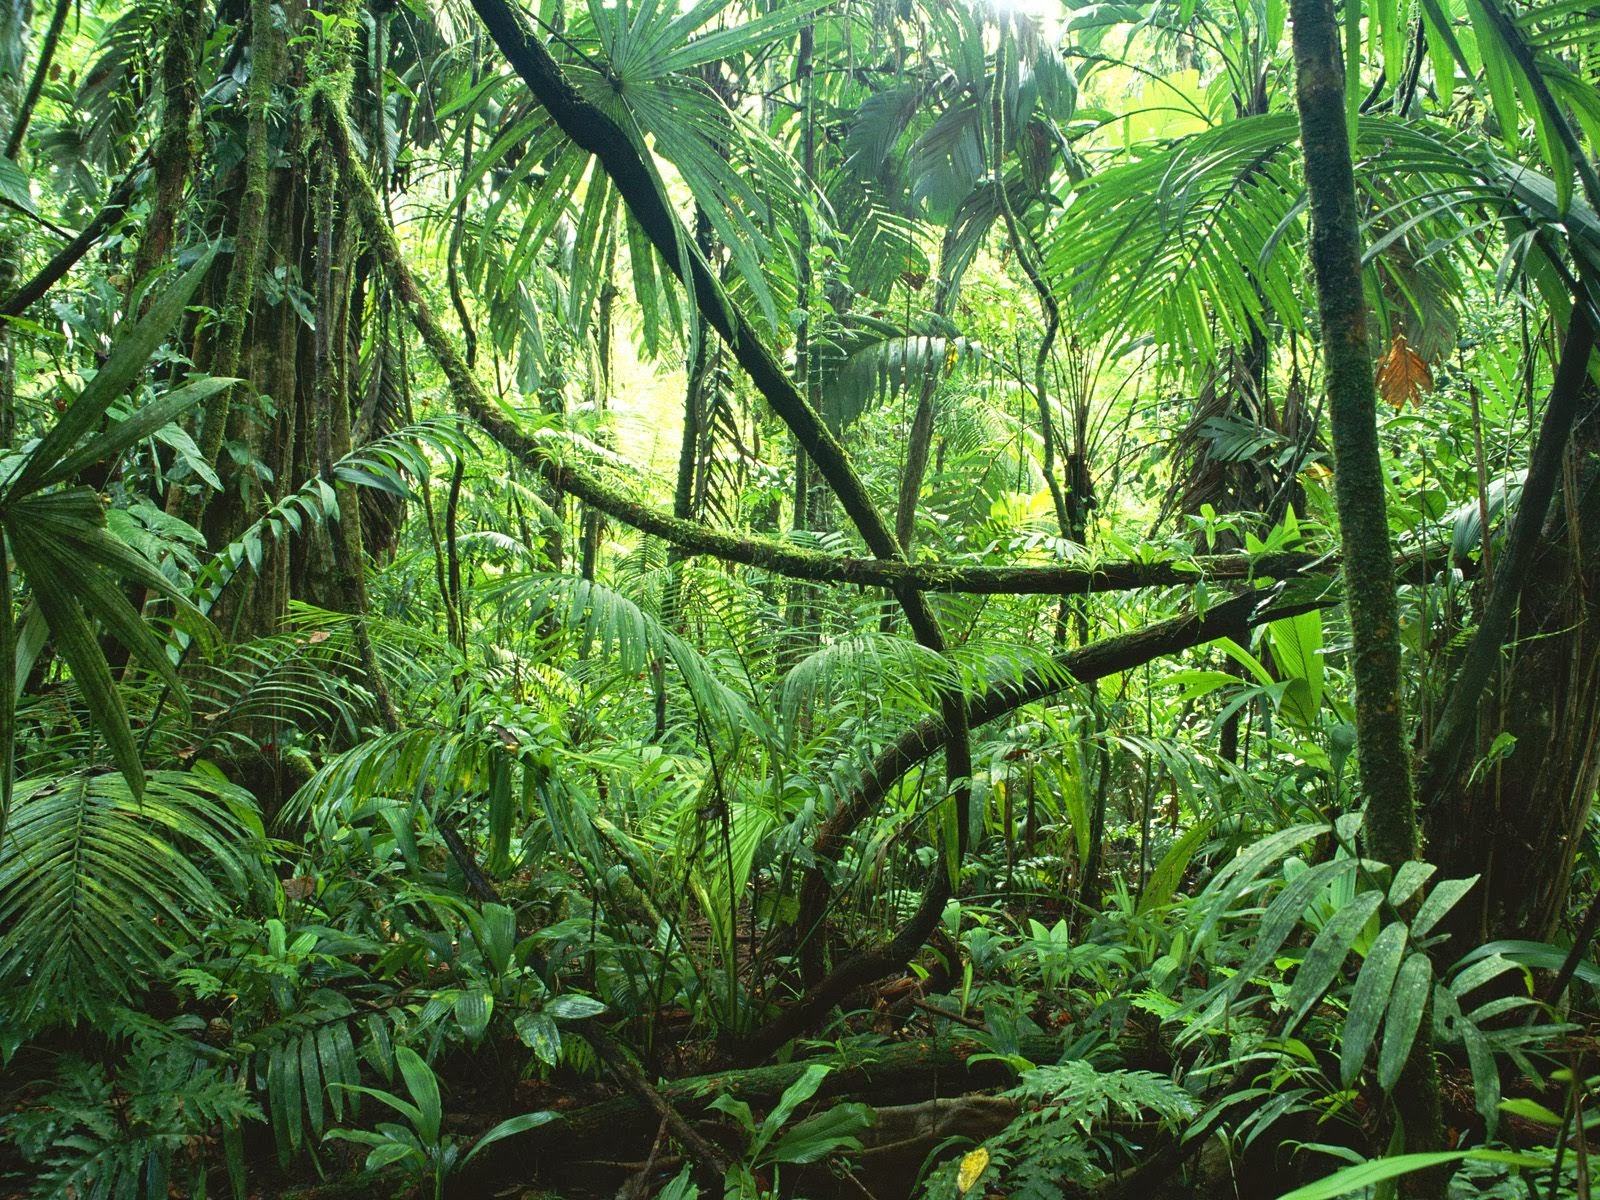 WHY SHOULD WE PROTECT THE RAINFOREST? |The Garden of Eaden